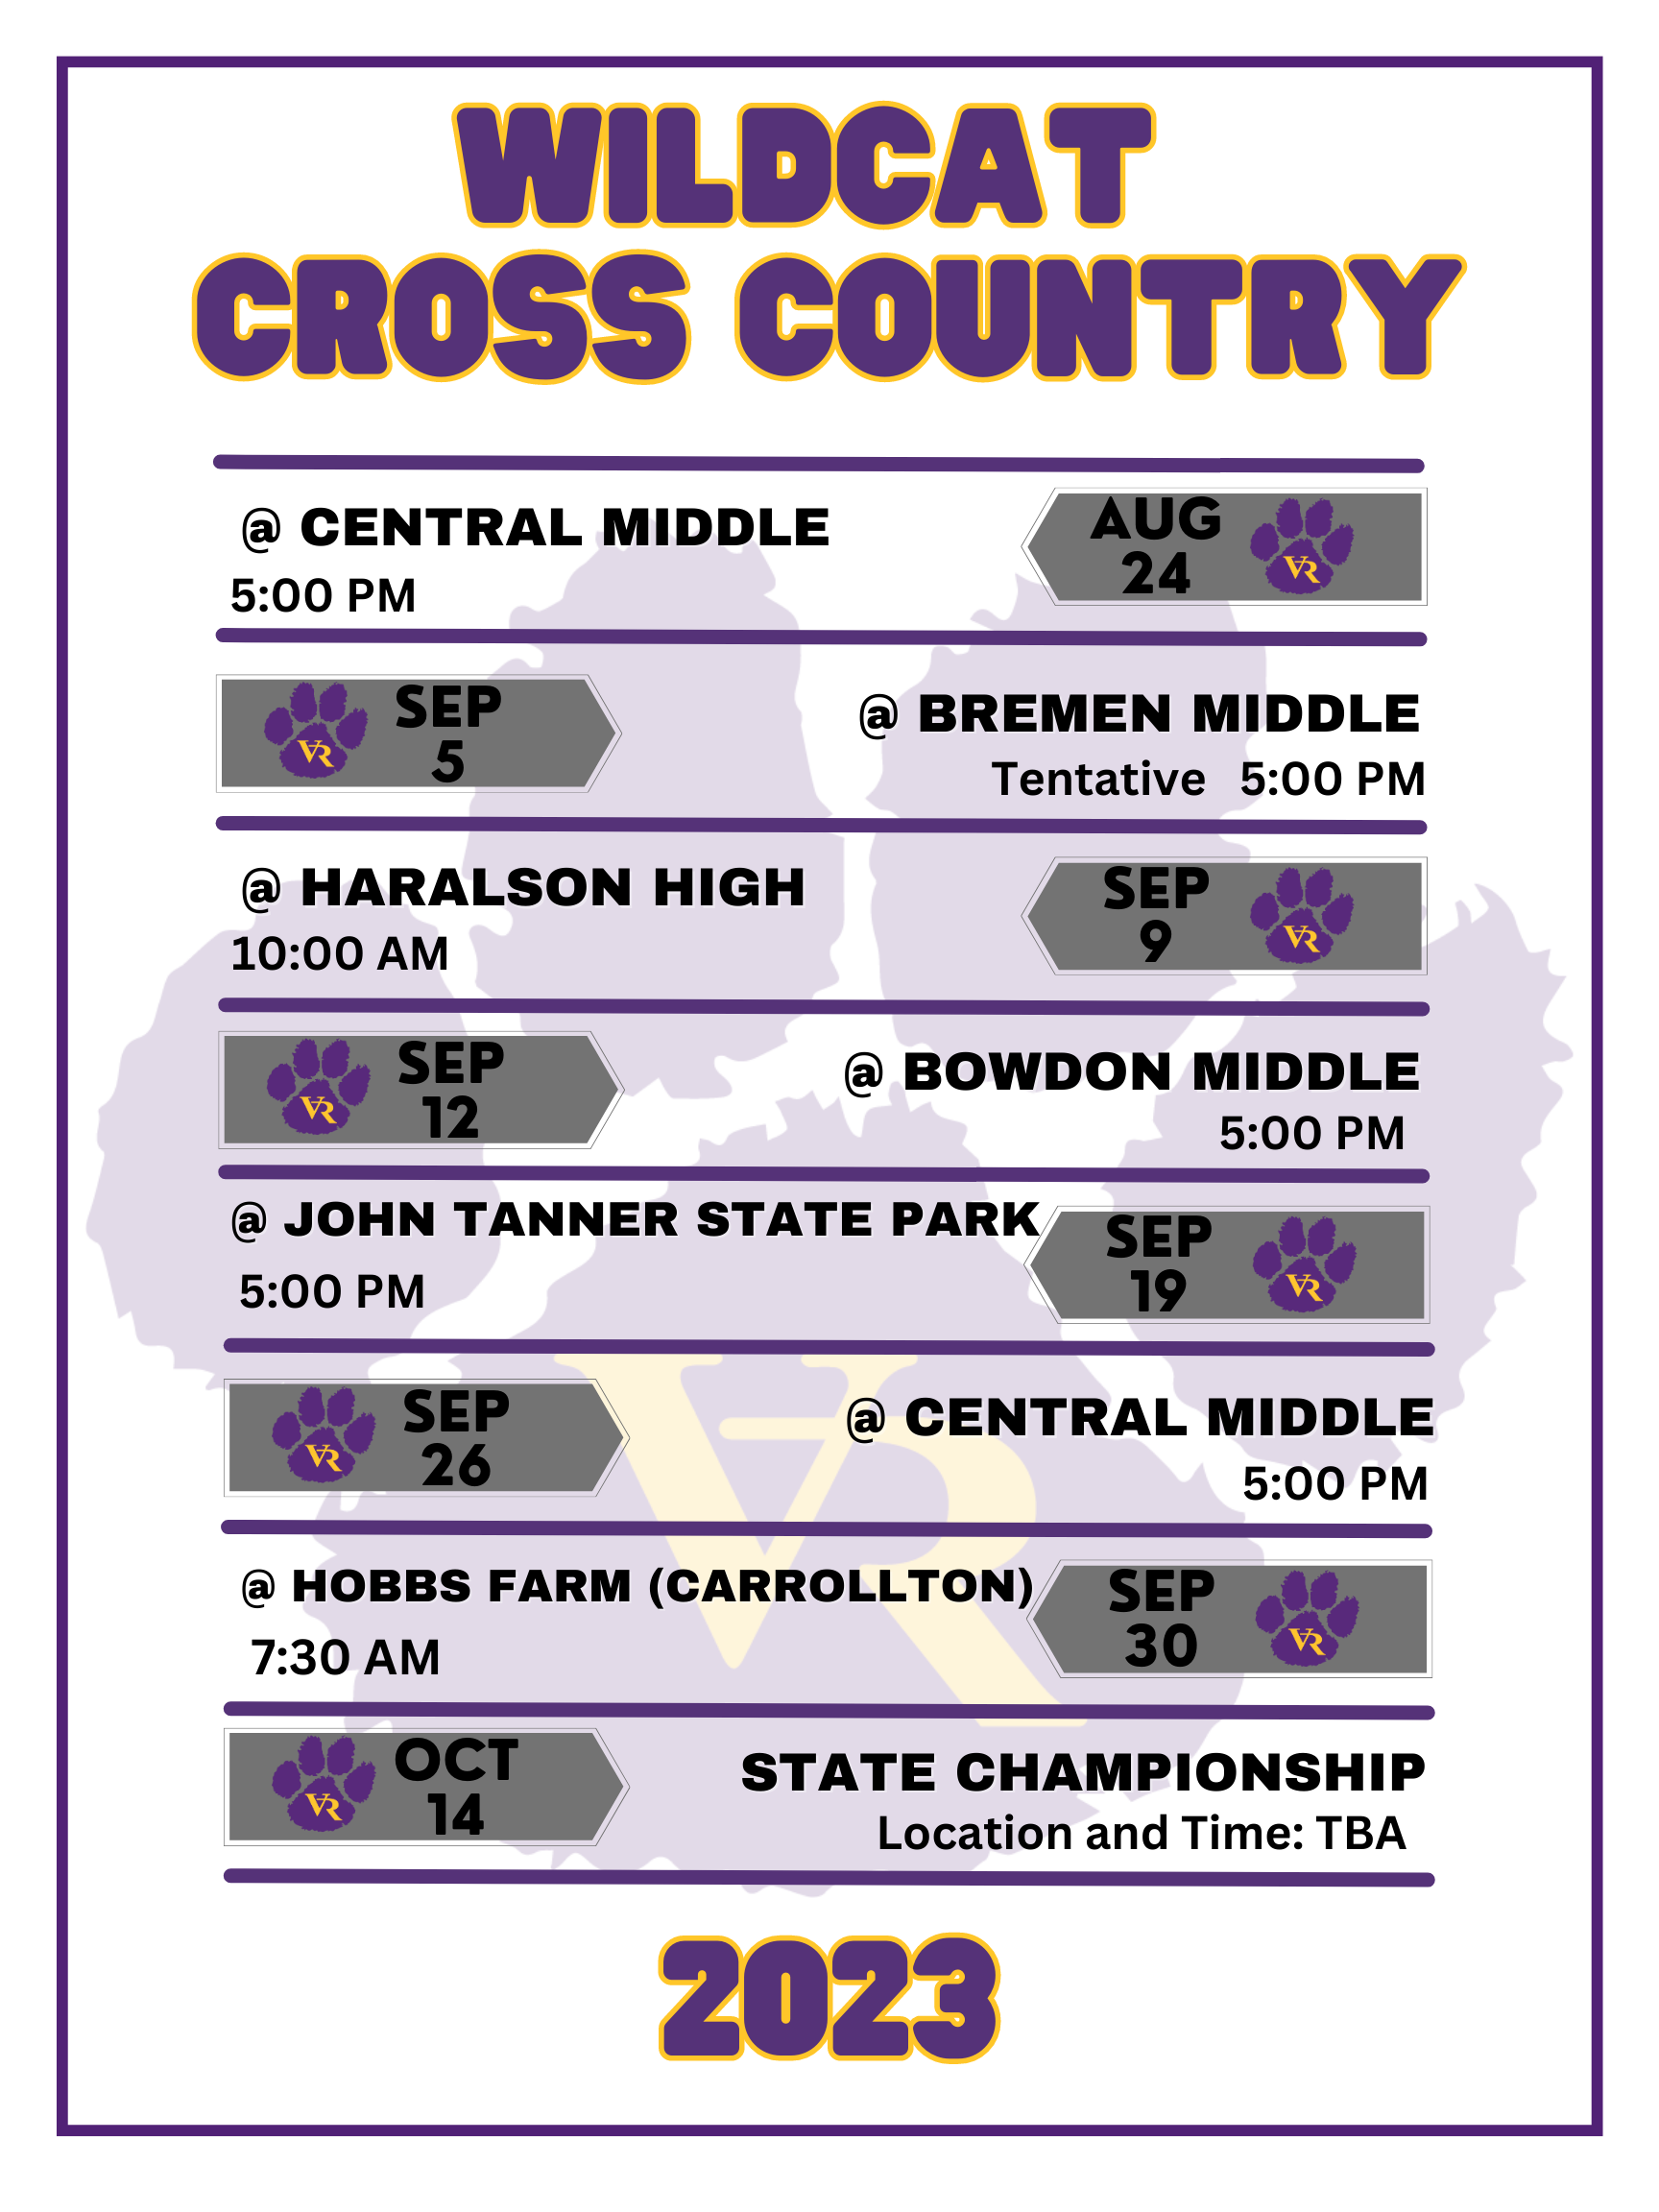 May be an image of text that says 'WILDCAT CROSS COUNTRY @ CENTRAL MIDDLE 5:00 PM WR VR BREMEN MIDDLE Tentative 5:00 PM HARALSON HIGH 10:00 AM RR VR @ JOHN TANNER STATE PARK 5:00 PM BOWDON MIDDLE 5:00 PM VR @ CENTRAL MIDDLE 5:00 PM HOBBS FARM (CARROLLTON) 7:30 AM VR VR STATE CHAMPIONSHIP Location and Time: TBA 2023'